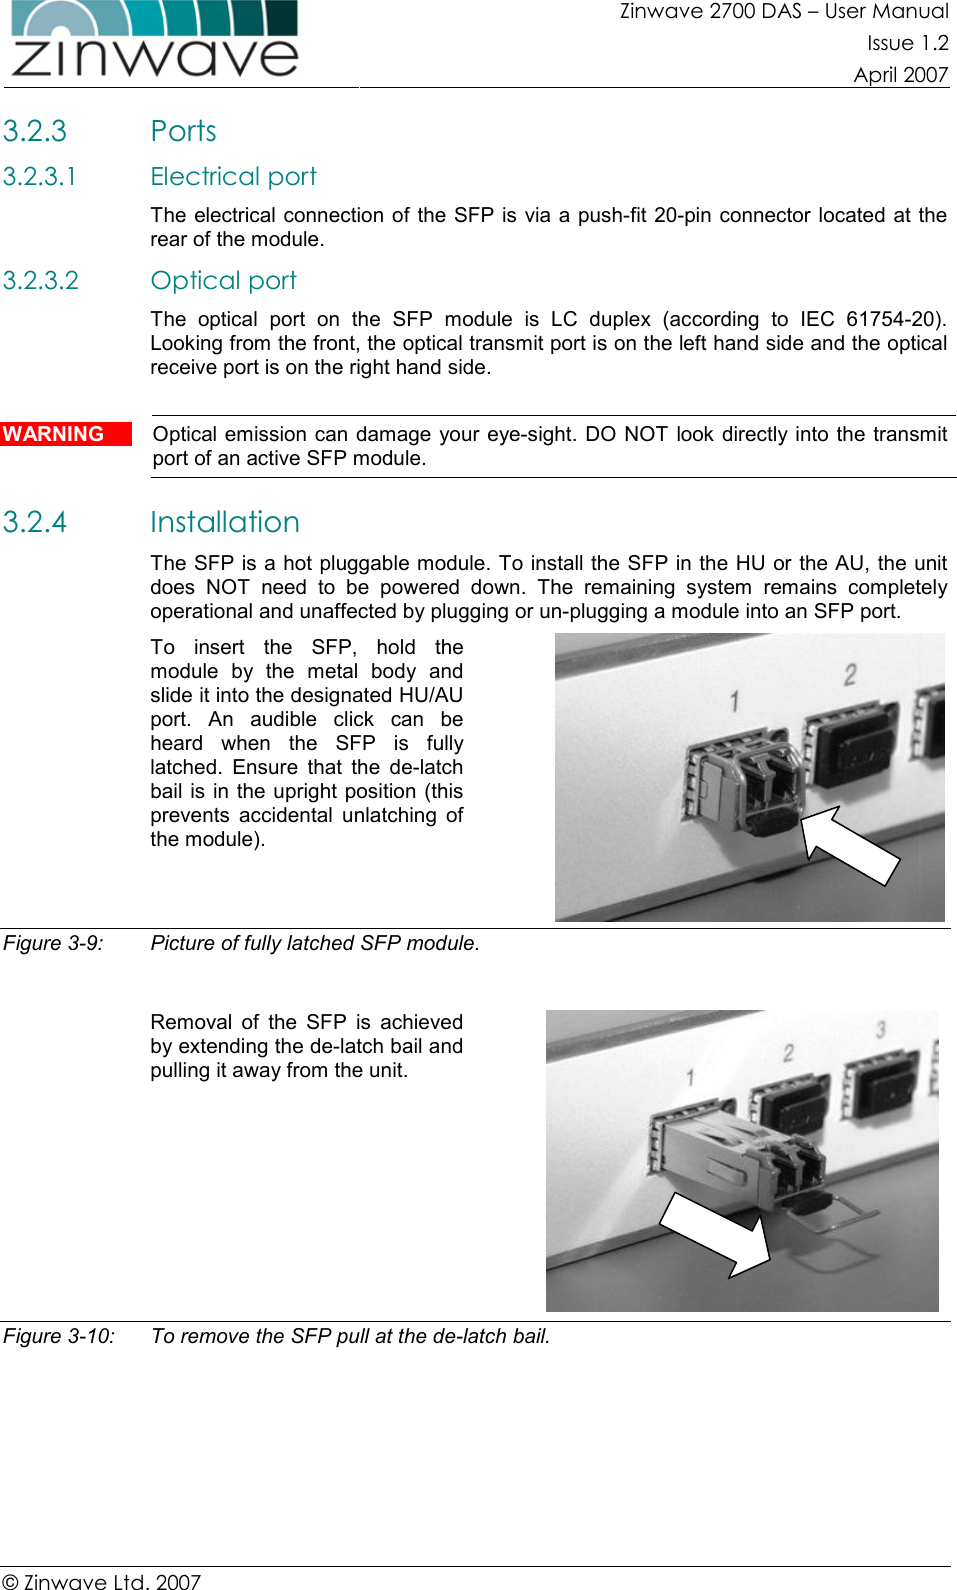 Zinwave 2700 DAS – User Manual Issue 1.2  April 2007  © Zinwave Ltd. 2007  3.2.3 Ports 3.2.3.1 Electrical port The electrical connection of the SFP is via a push-fit 20-pin connector located at the rear of the module. 3.2.3.2 Optical port The  optical  port  on  the  SFP  module  is  LC  duplex  (according  to  IEC  61754-20). Looking from the front, the optical transmit port is on the left hand side and the optical receive port is on the right hand side.  WARNING  Optical emission can damage  your eye-sight. DO NOT look directly into the transmit port of an active SFP module. 3.2.4 Installation The SFP is a hot pluggable module. To install the SFP in the HU or the AU, the unit does  NOT  need  to  be  powered  down.  The  remaining  system  remains  completely operational and unaffected by plugging or un-plugging a module into an SFP port. To  insert  the  SFP,  hold  the module  by  the  metal  body  and slide it into the designated HU/AU port.  An  audible  click  can  be heard  when  the  SFP  is  fully latched.  Ensure  that  the  de-latch bail is in the upright position (this prevents  accidental  unlatching  of the module).   Figure 3-9:  Picture of fully latched SFP module.  Removal  of  the  SFP  is  achieved by extending the de-latch bail and pulling it away from the unit.   Figure 3-10:  To remove the SFP pull at the de-latch bail.       